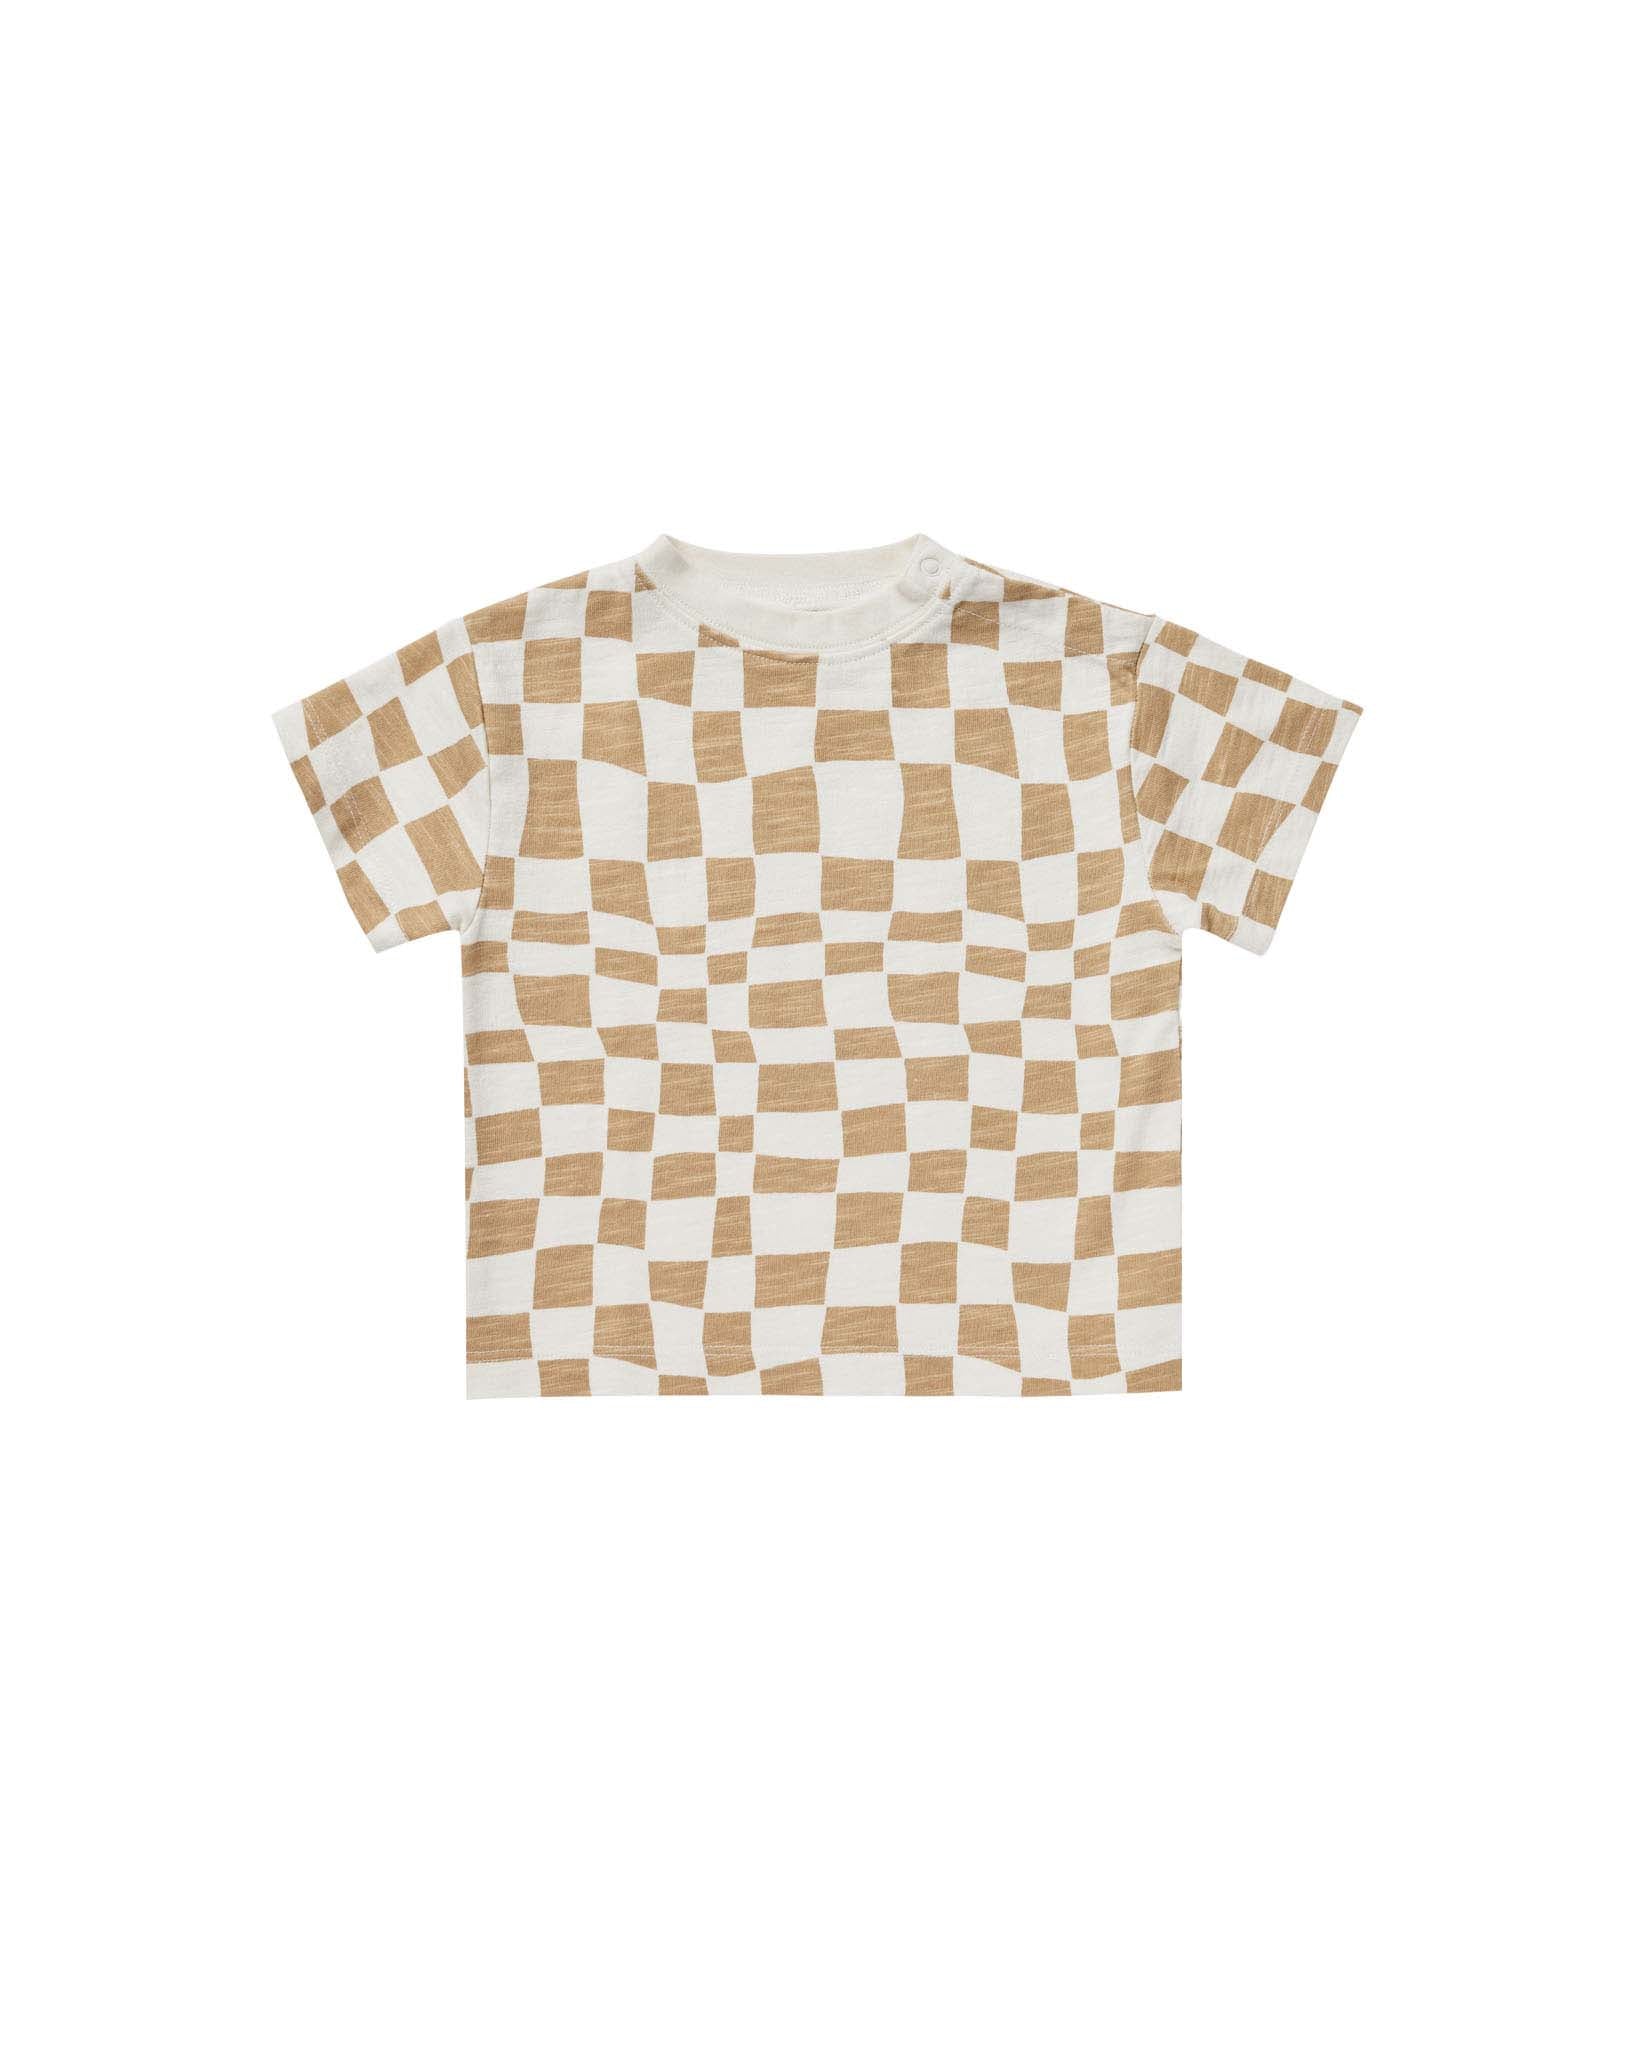 Little rylee + cru KIDS relaxed tee in sand check